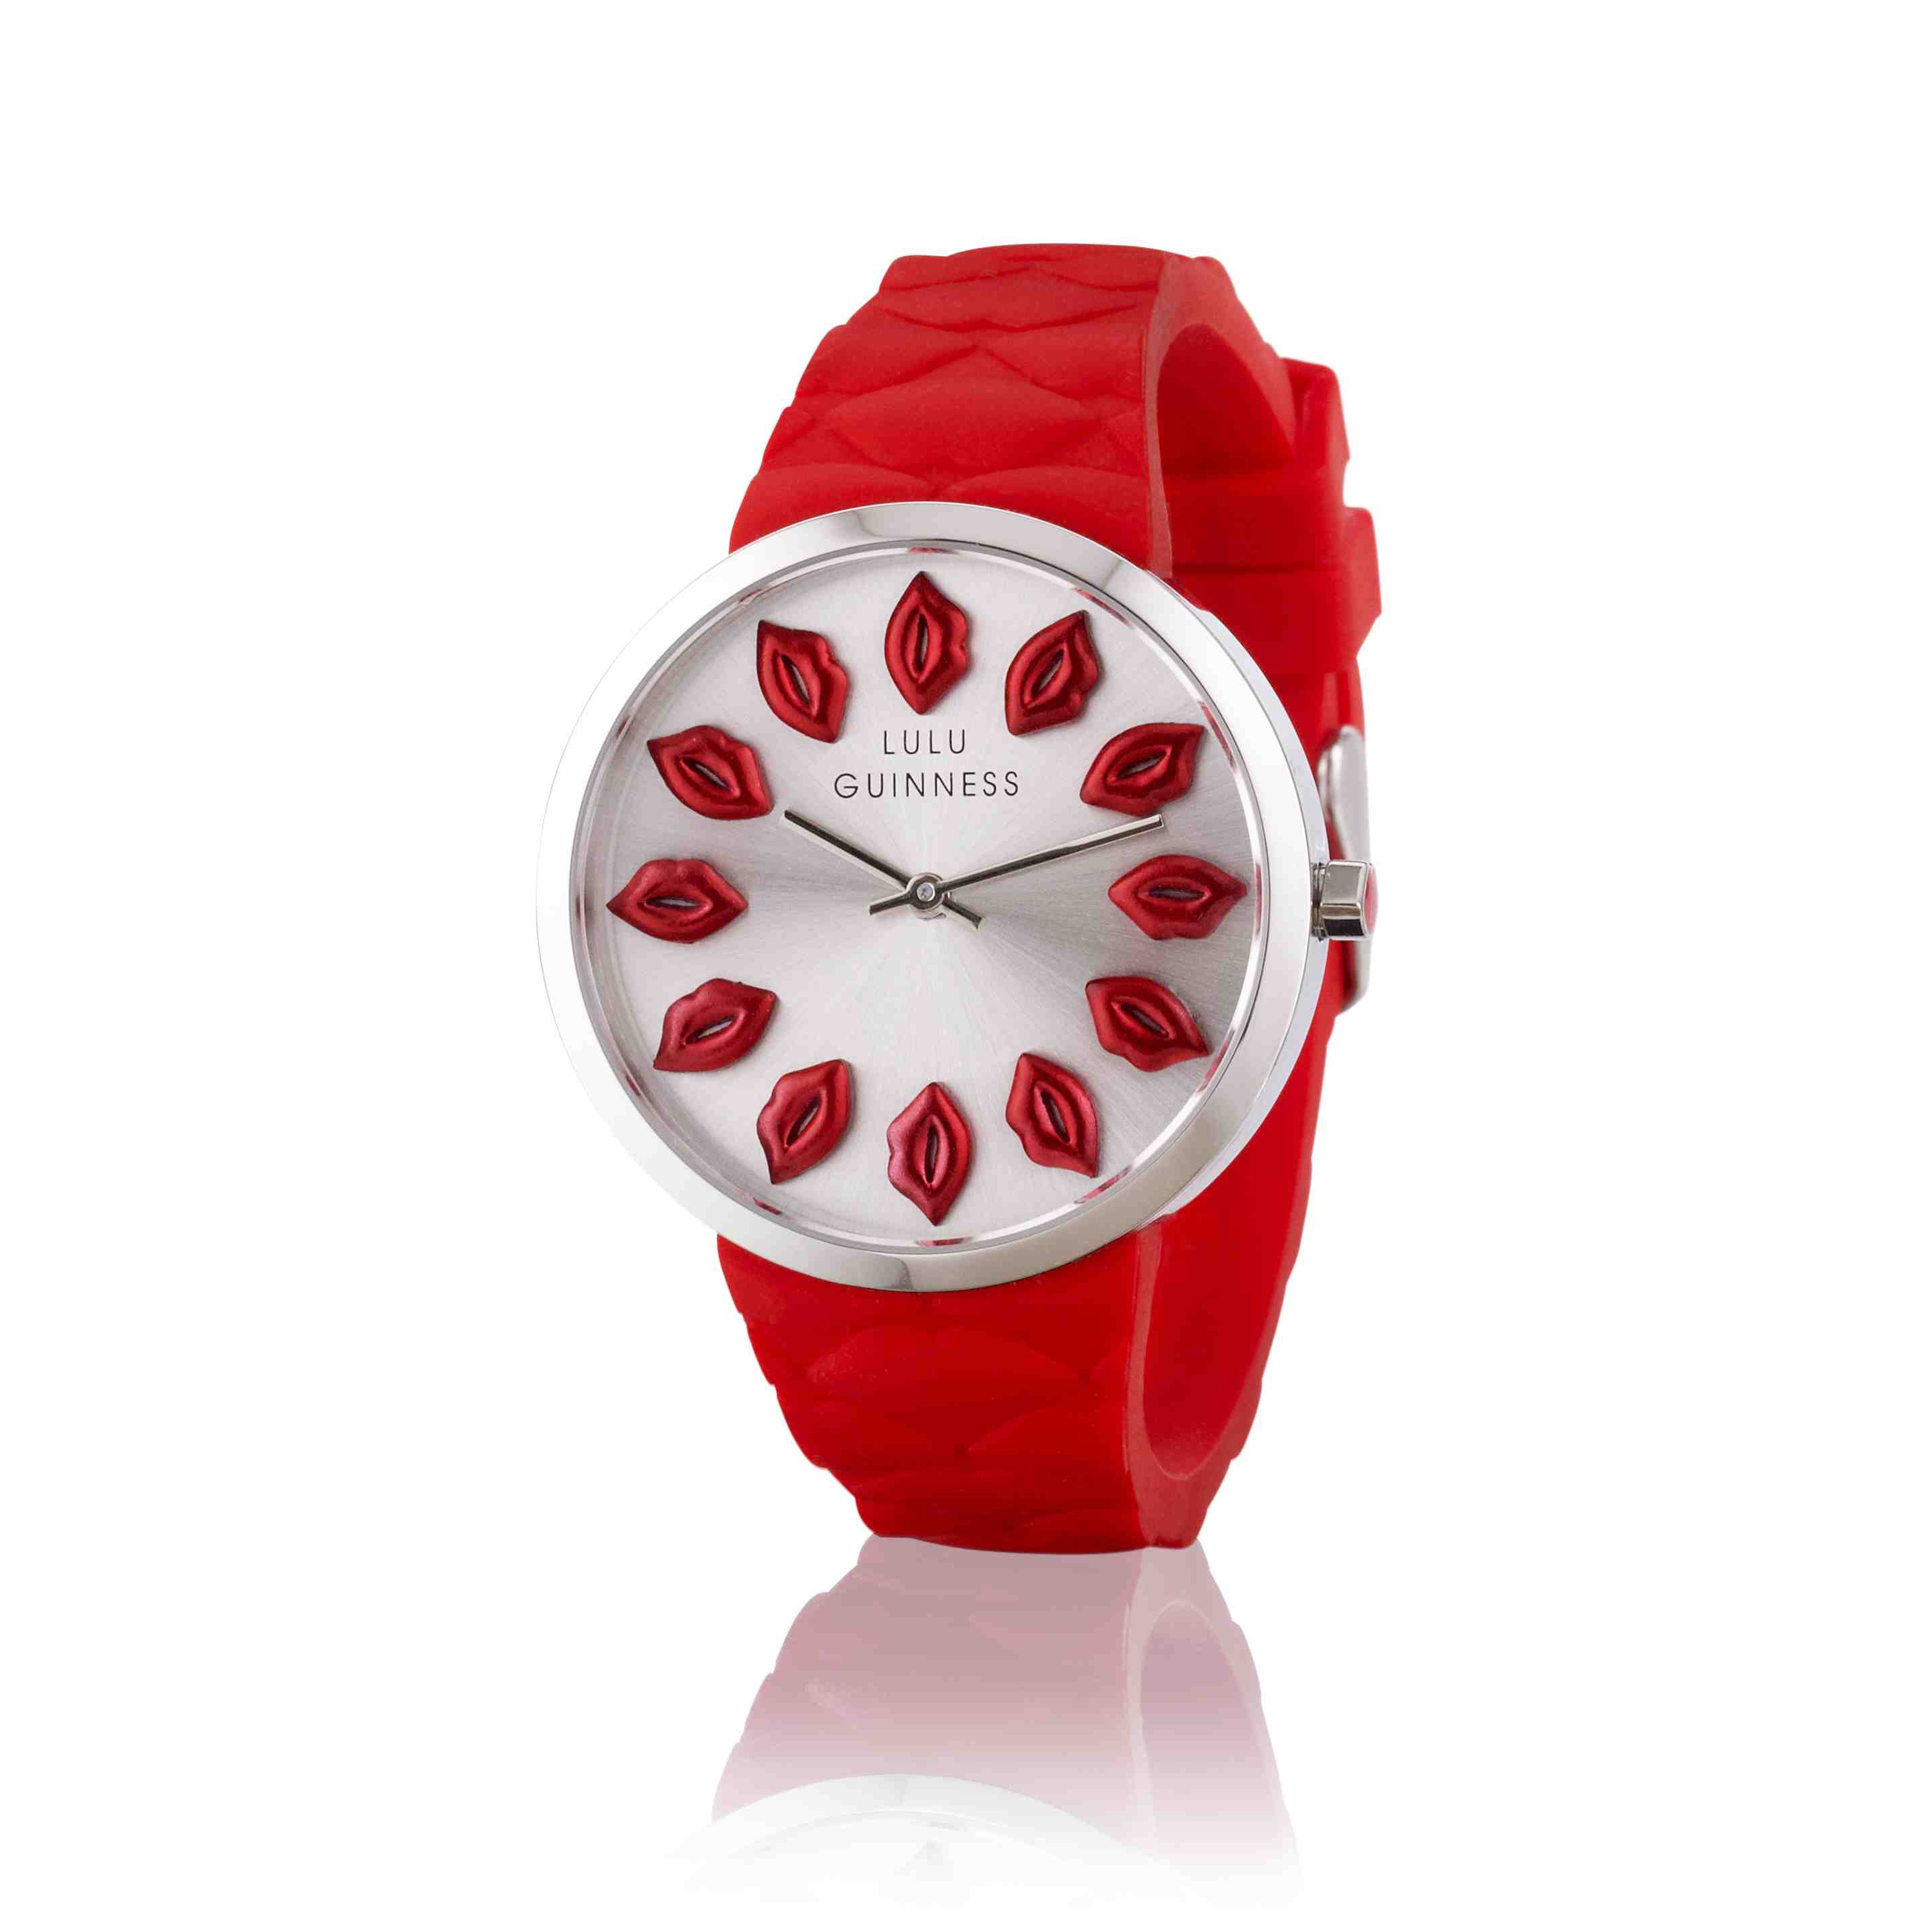 Lulu Guinness Launches First Watch Collection – Tipsy Diaries